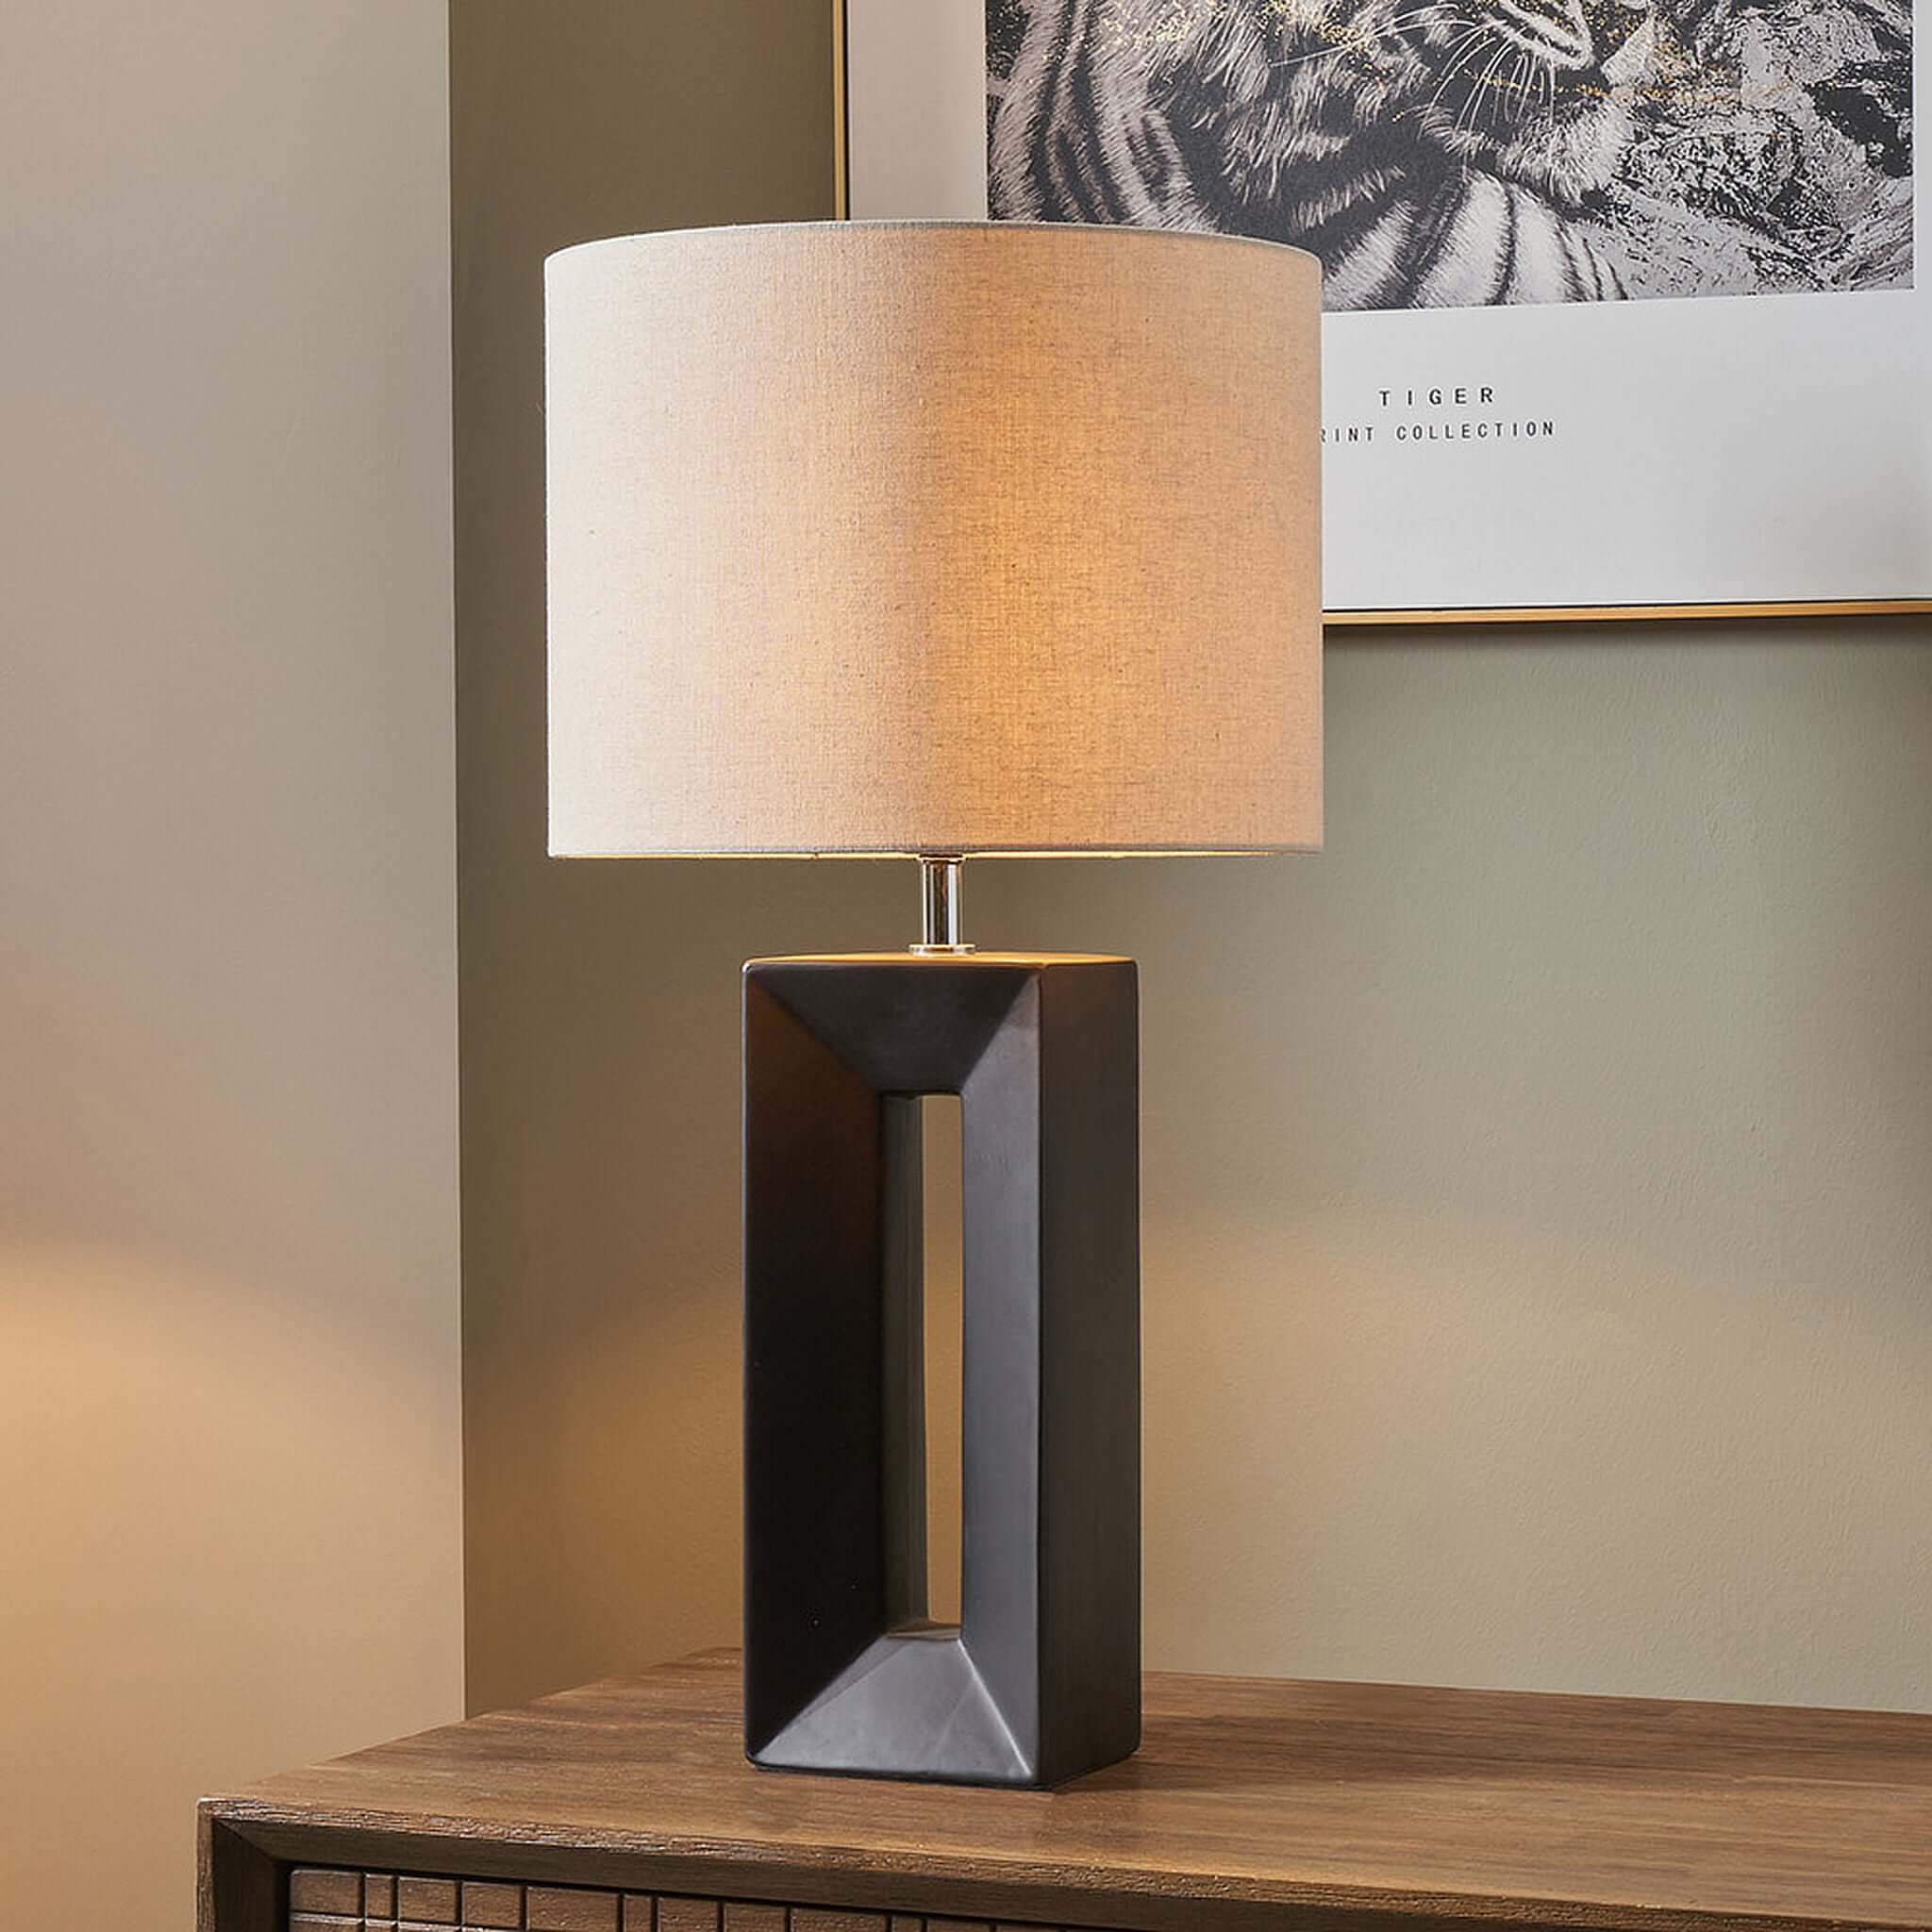 London Table Lamp with Shade